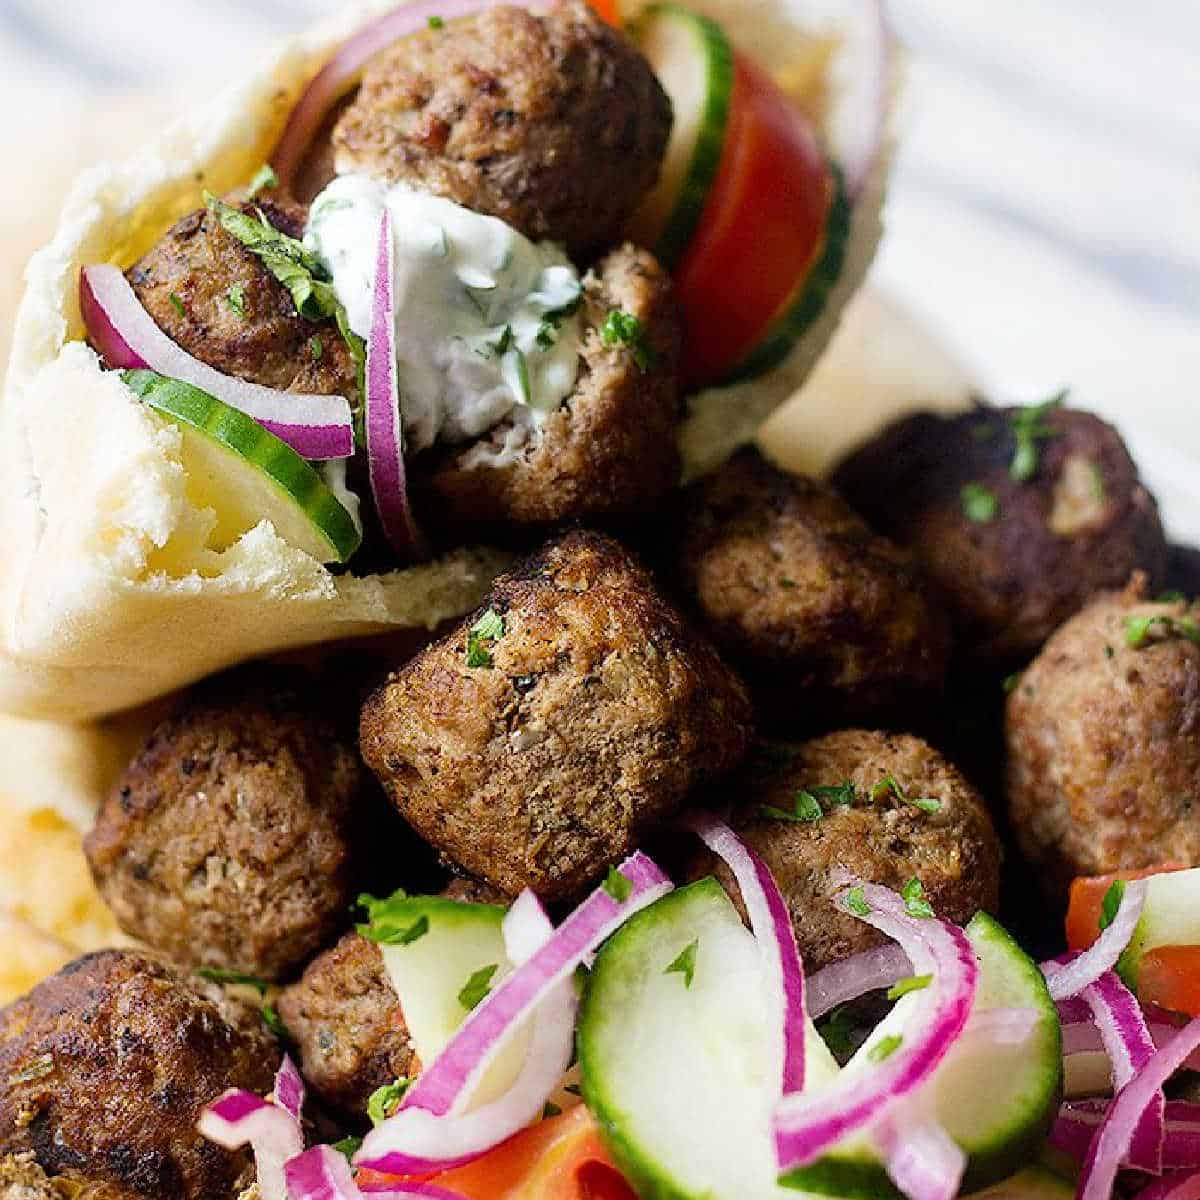 Keftedes are Greek meatballs that are juicy, delicious and easy to make. Serve them with some pita, salad and tzatziki for a complete Mediterranean meal!
